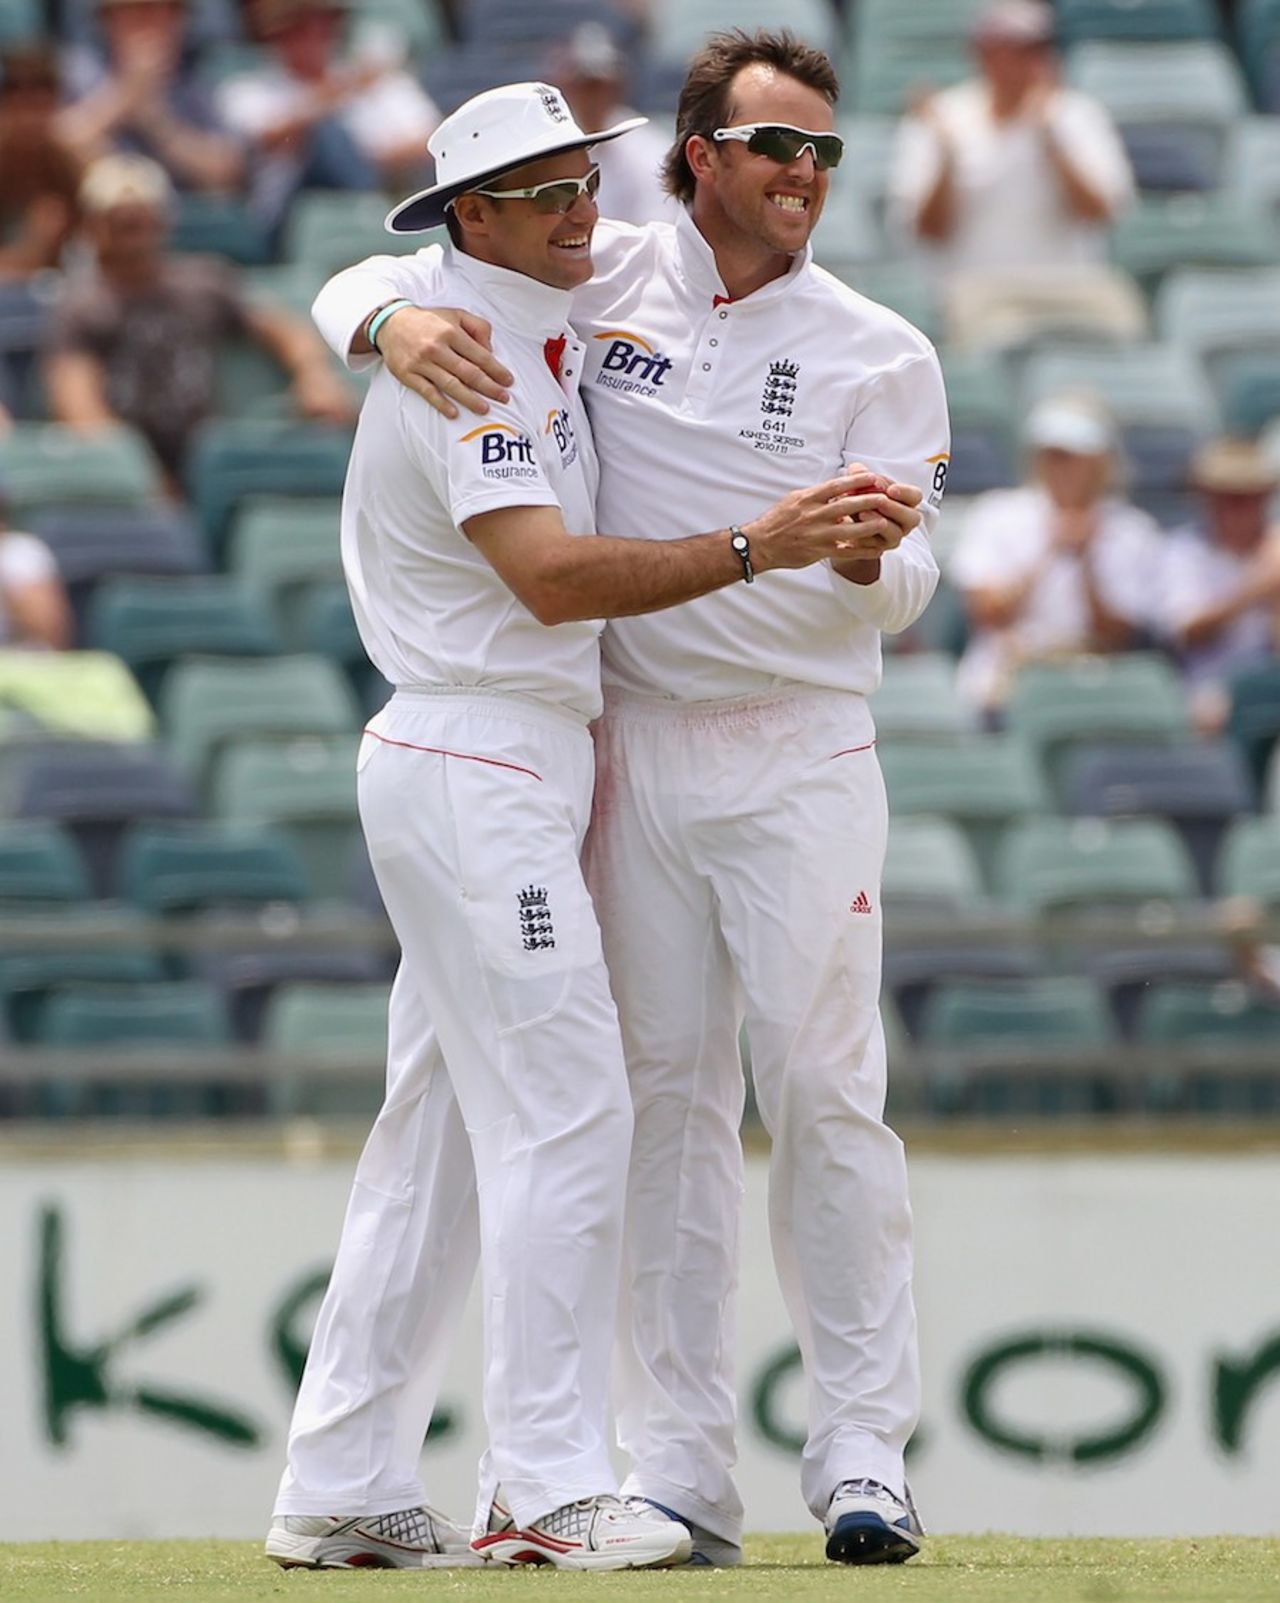 Andrew Strauss and Graeme Swann celebrate a wicket, Western Australia v England XI, tour match, Perth, 3rd day, November 7, 2010